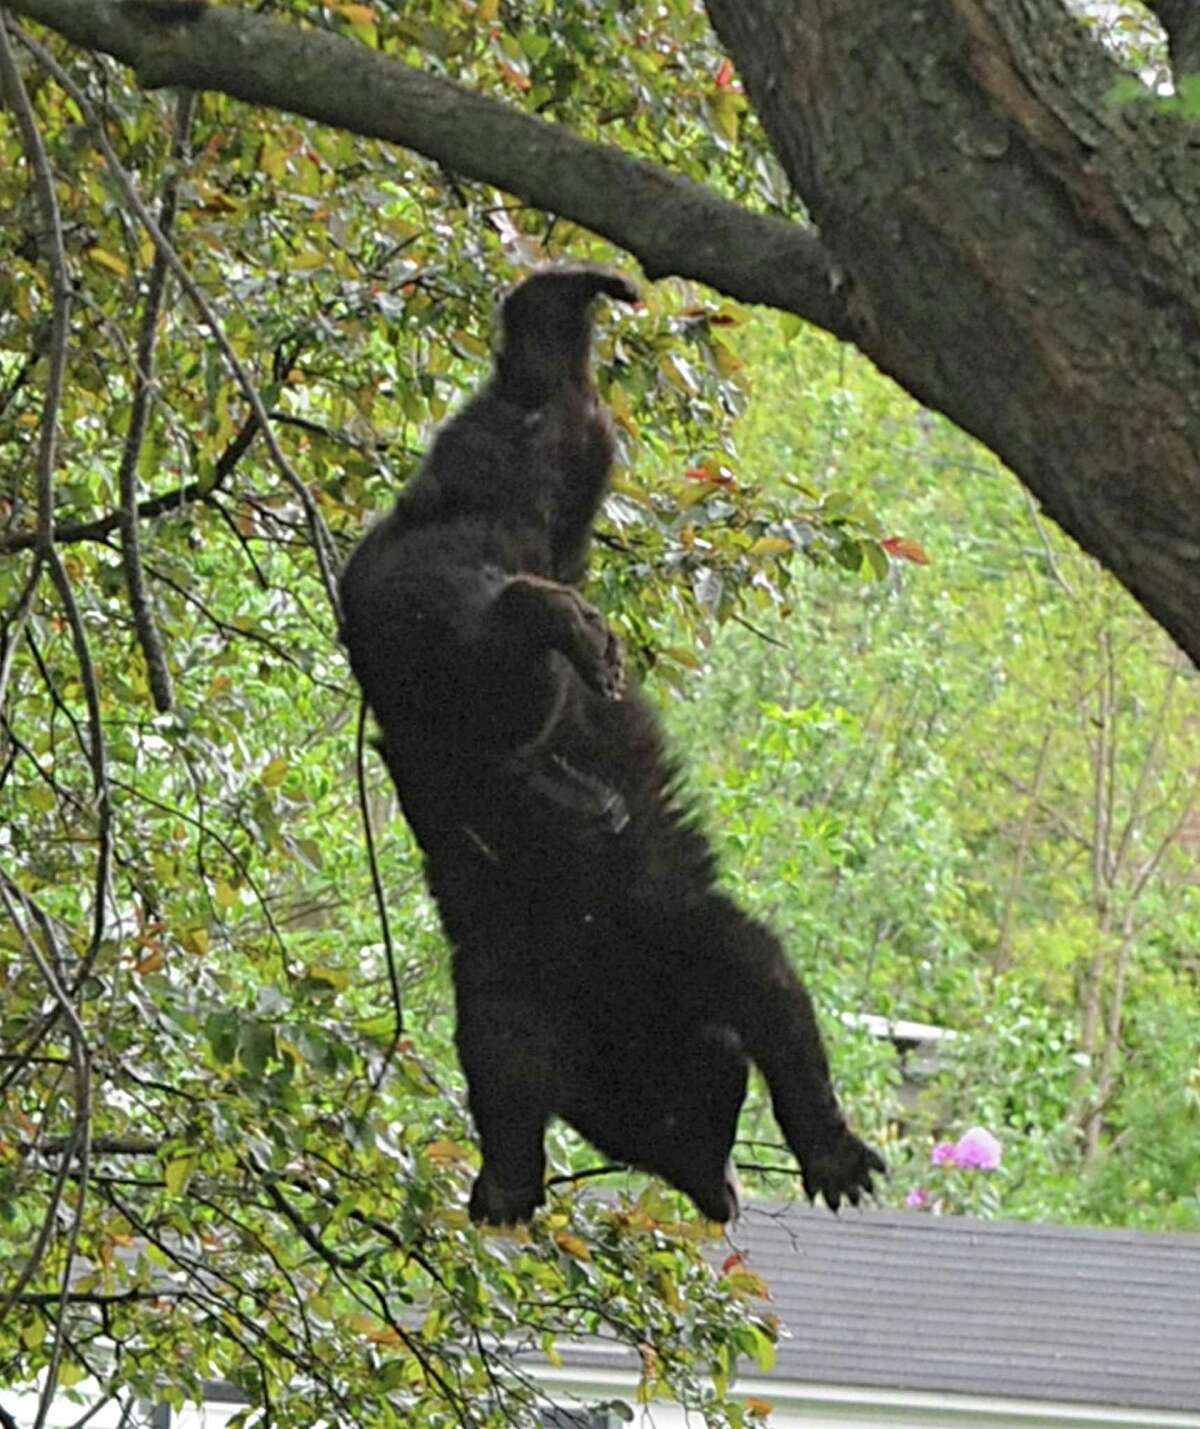 A bear which was shot with a tranquilizer gun falls out of a tree near North College St. in the Stockade Thursday, May 10, 2012 in Schenectady, N.Y. (Lori Van Buren / Times Union)